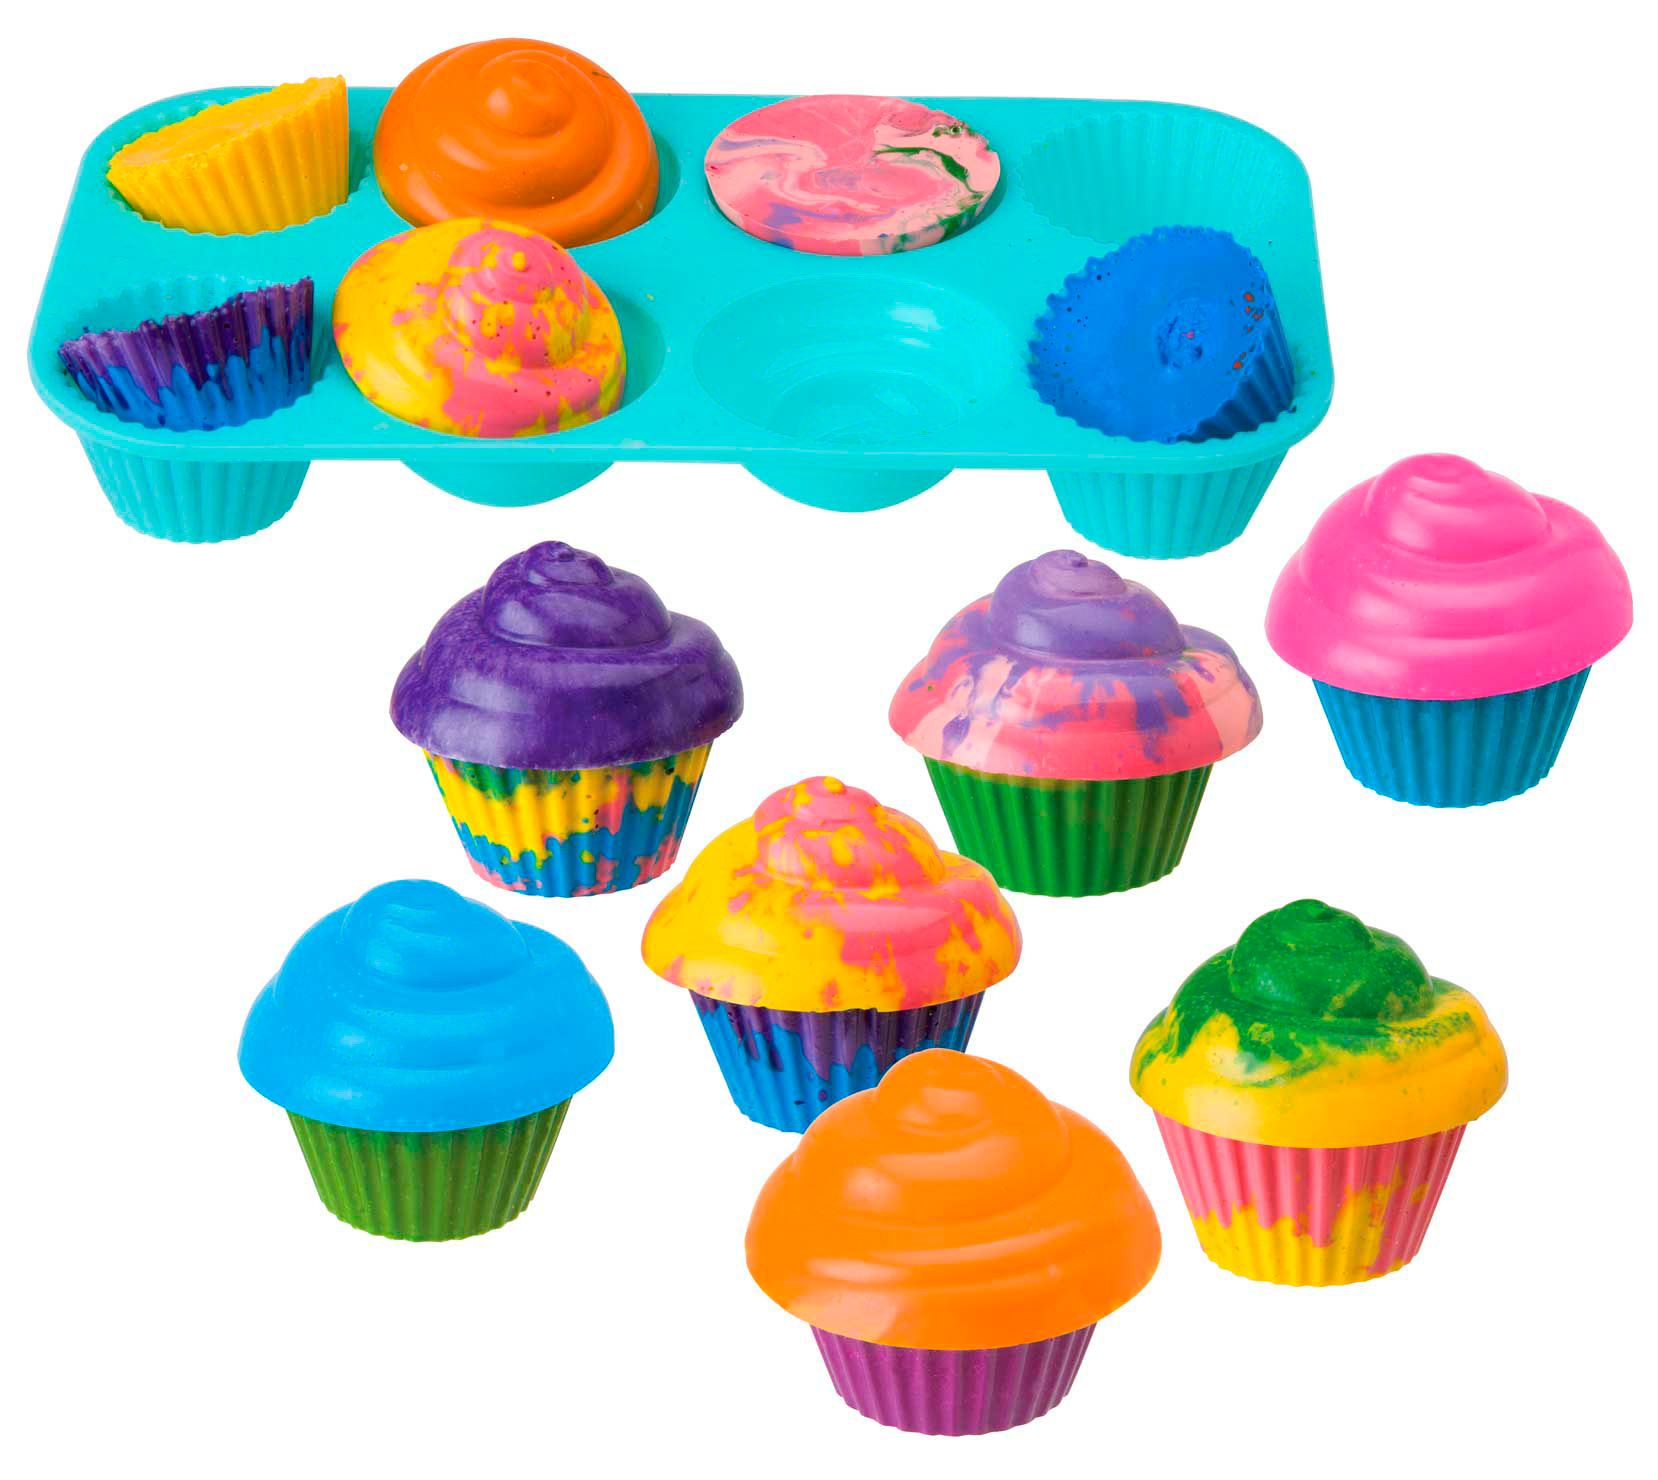 ALEX Toys Craft Make Your Own Cupcake Crayons - image 2 of 2